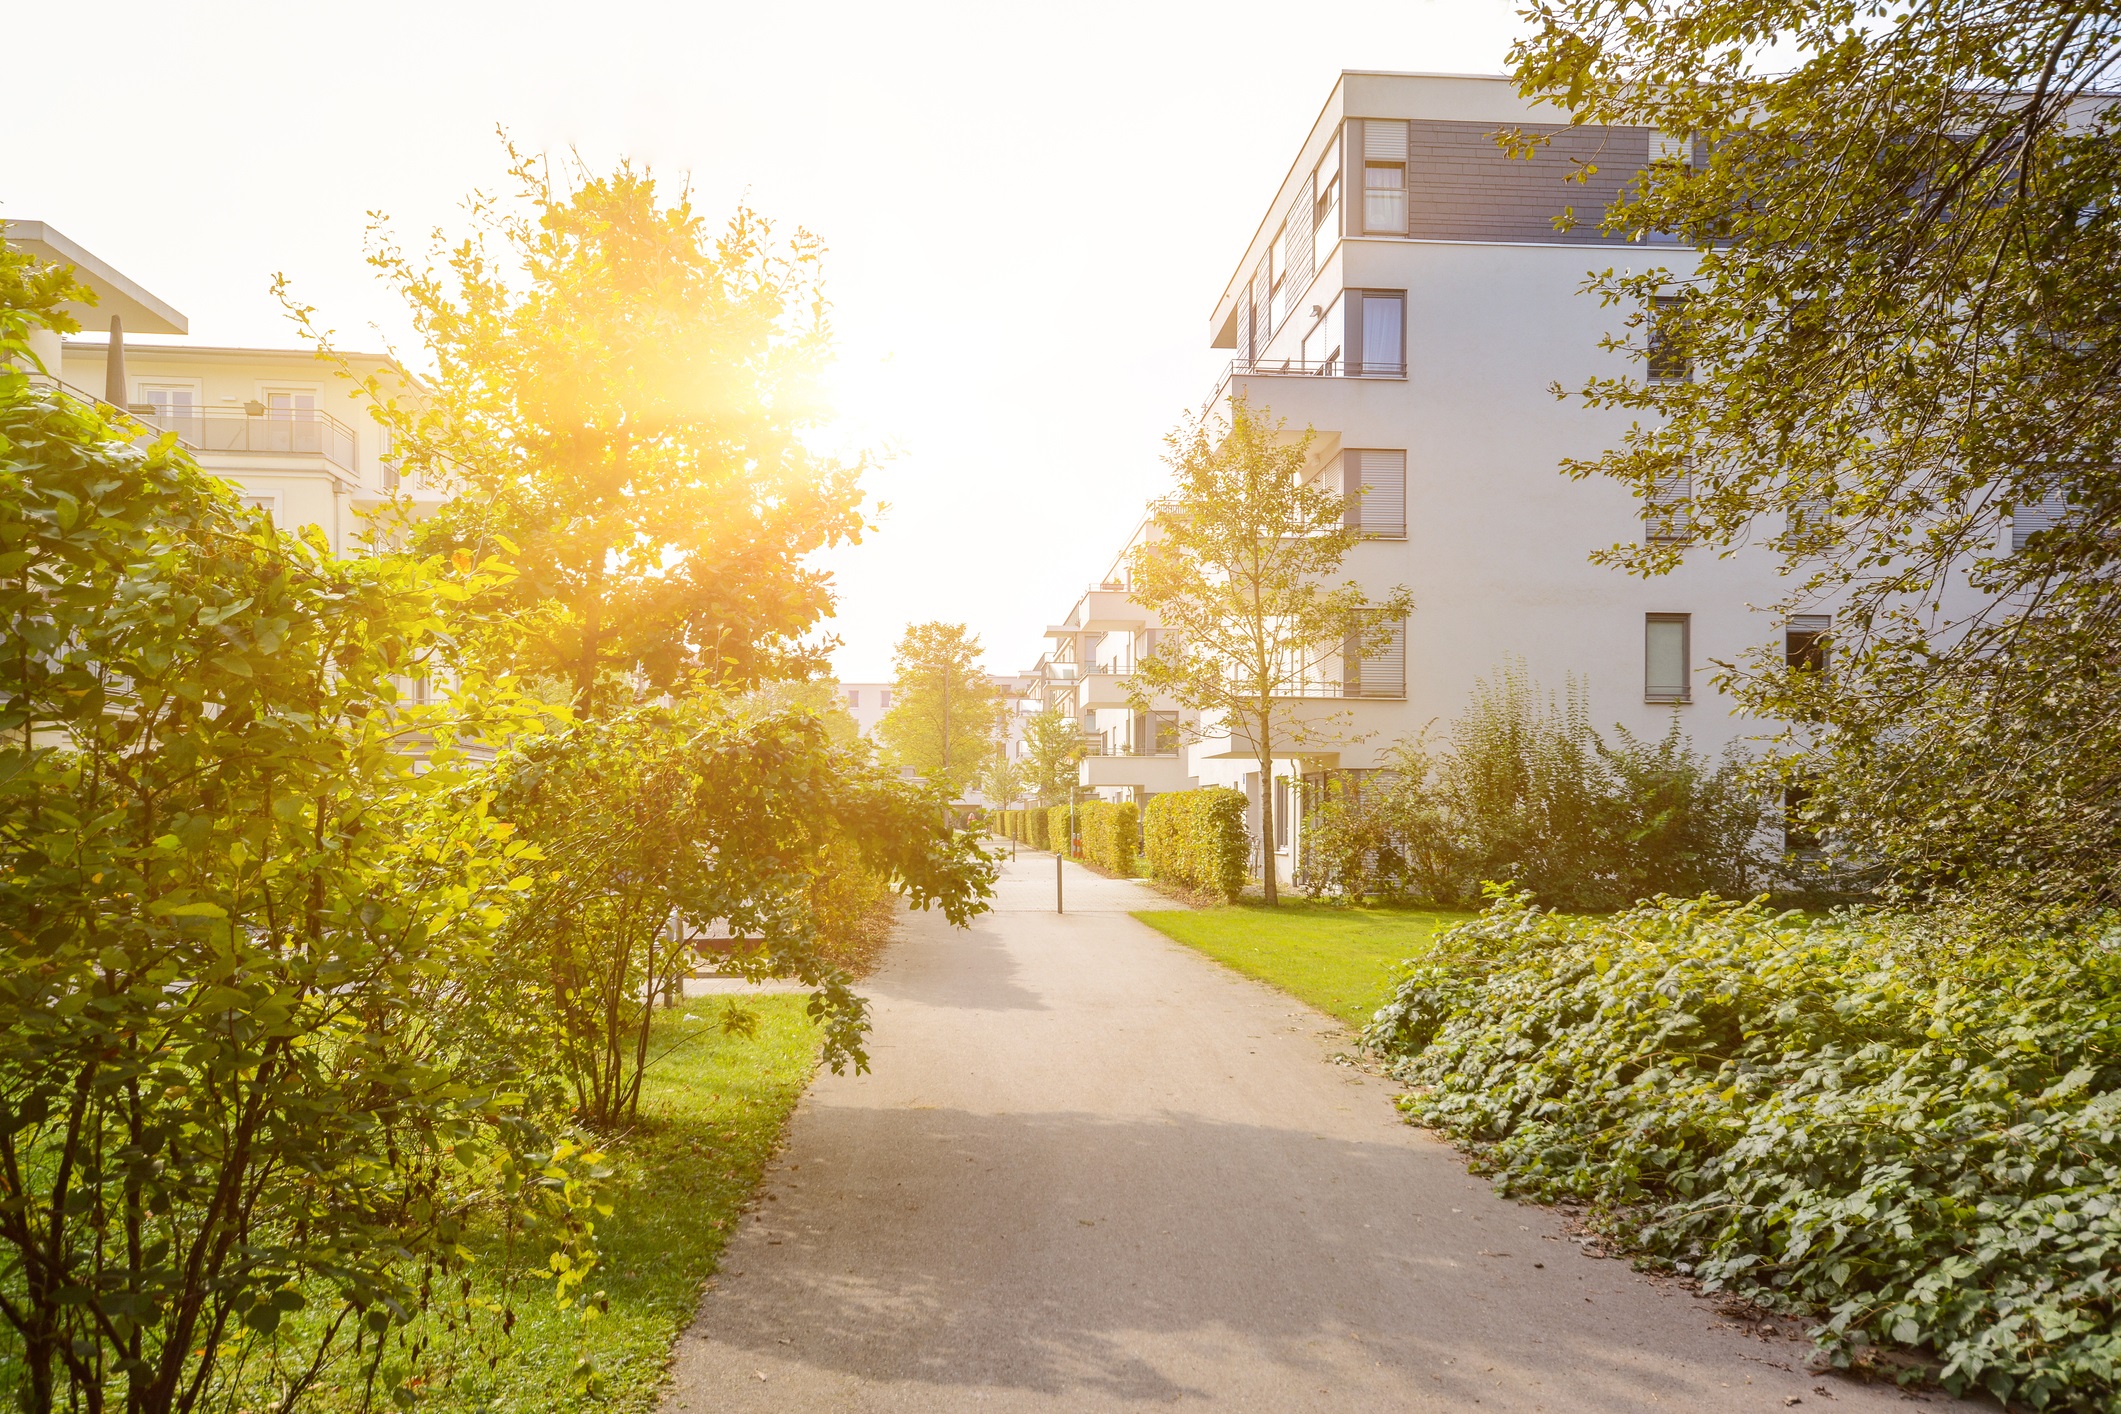 The compelling case for retaining trees in new developments